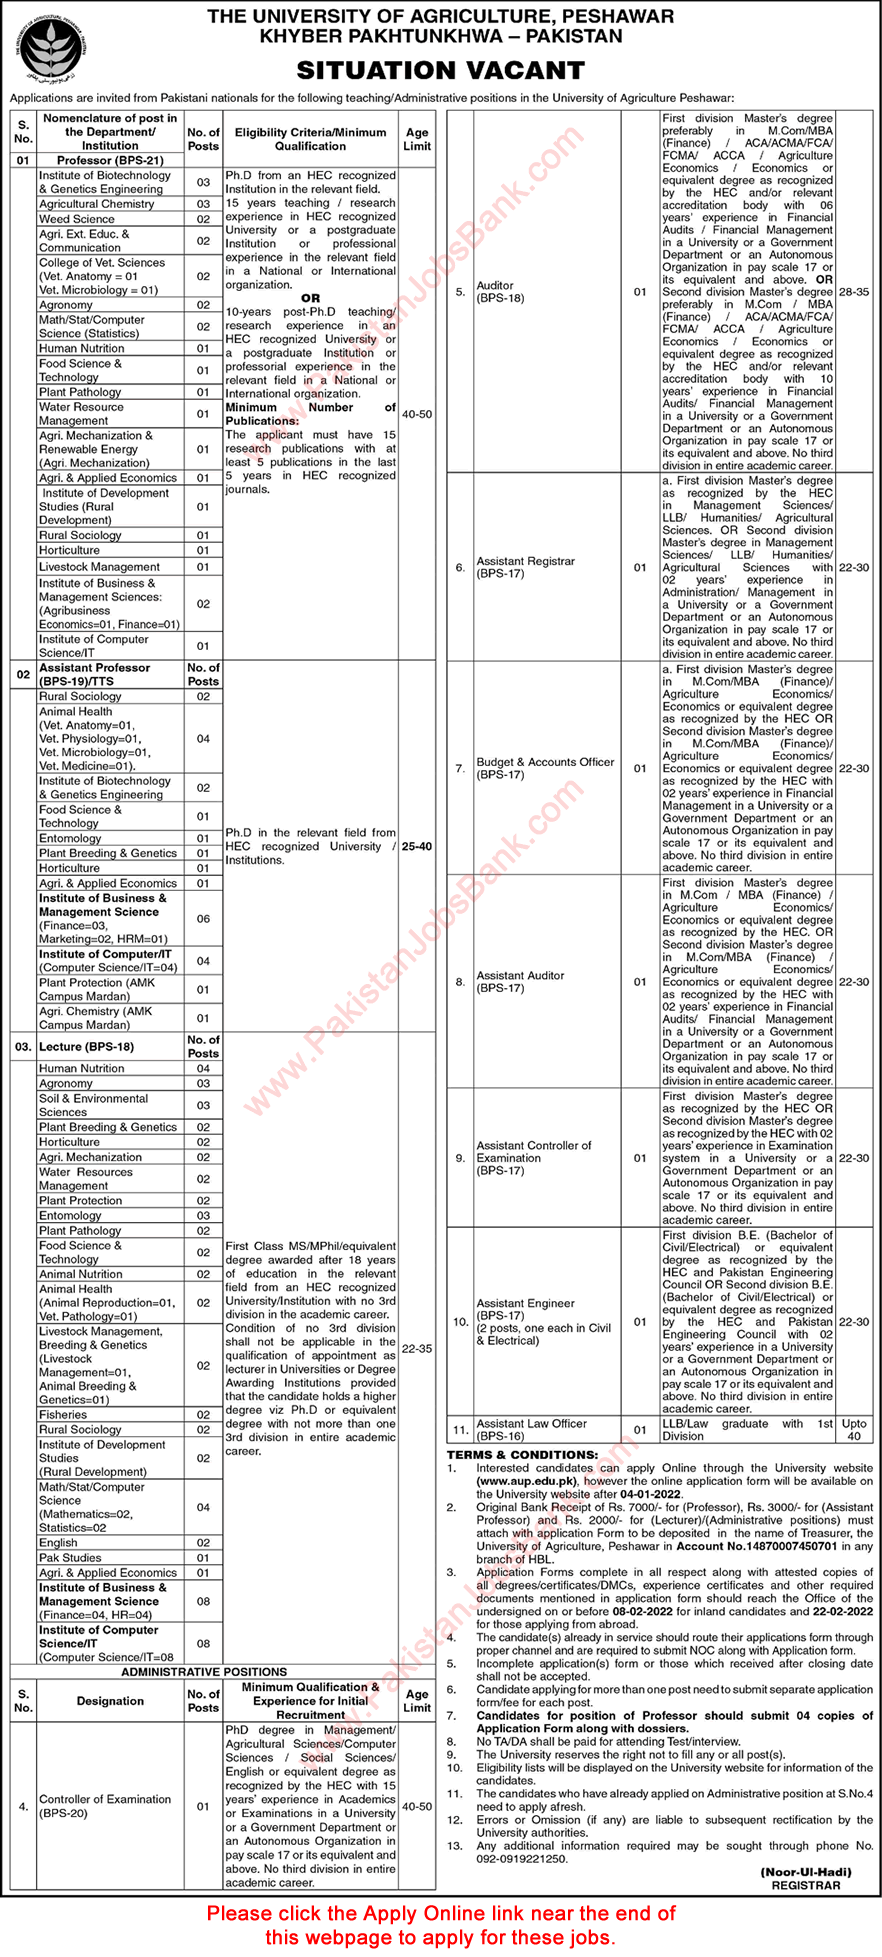 University of Agriculture Peshawar Jobs December 2021 / 2022 Apply Online Teaching Faculty Latest